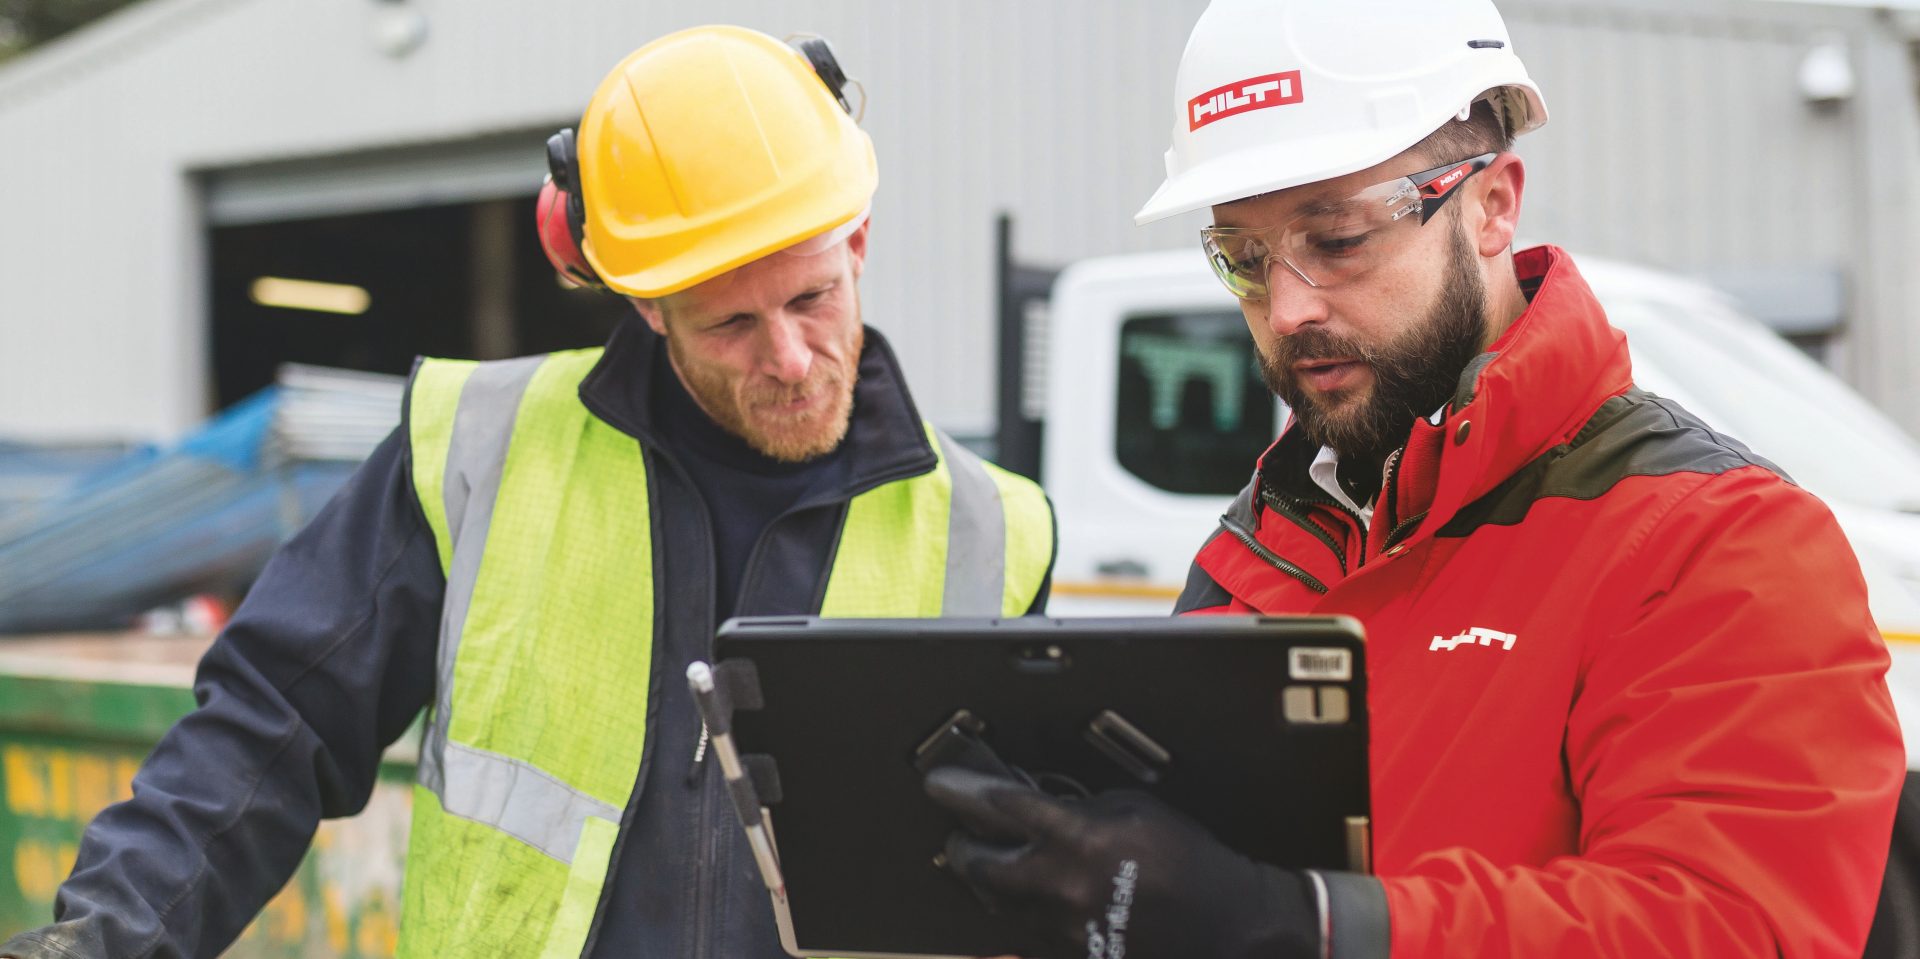 Our connected tools and asset management solutions help digitalize processes around tools and equipment to gain efficiency and competitive advantage